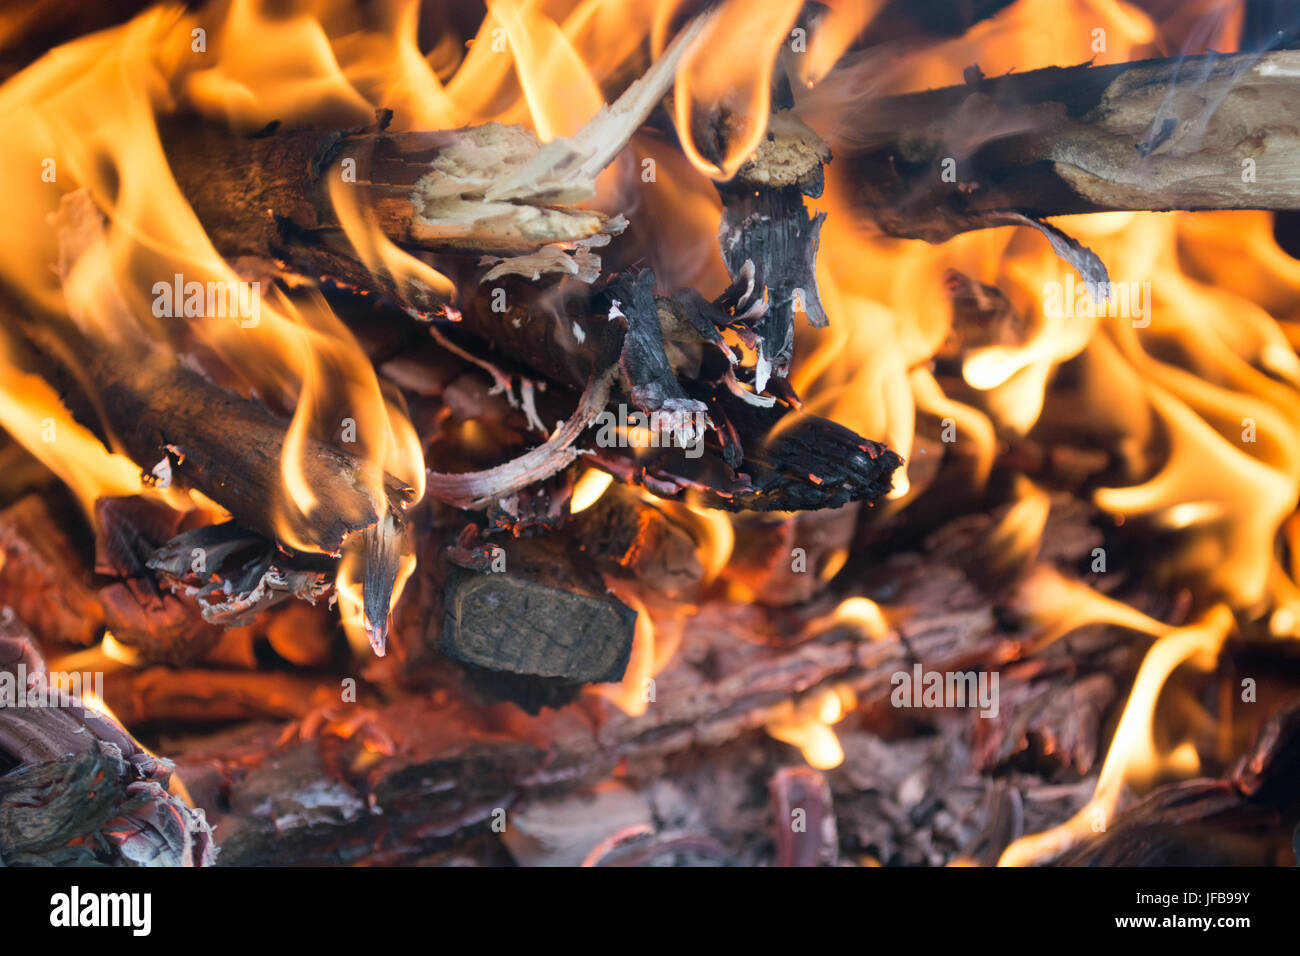 Fire in the small portable stove Stock Photo